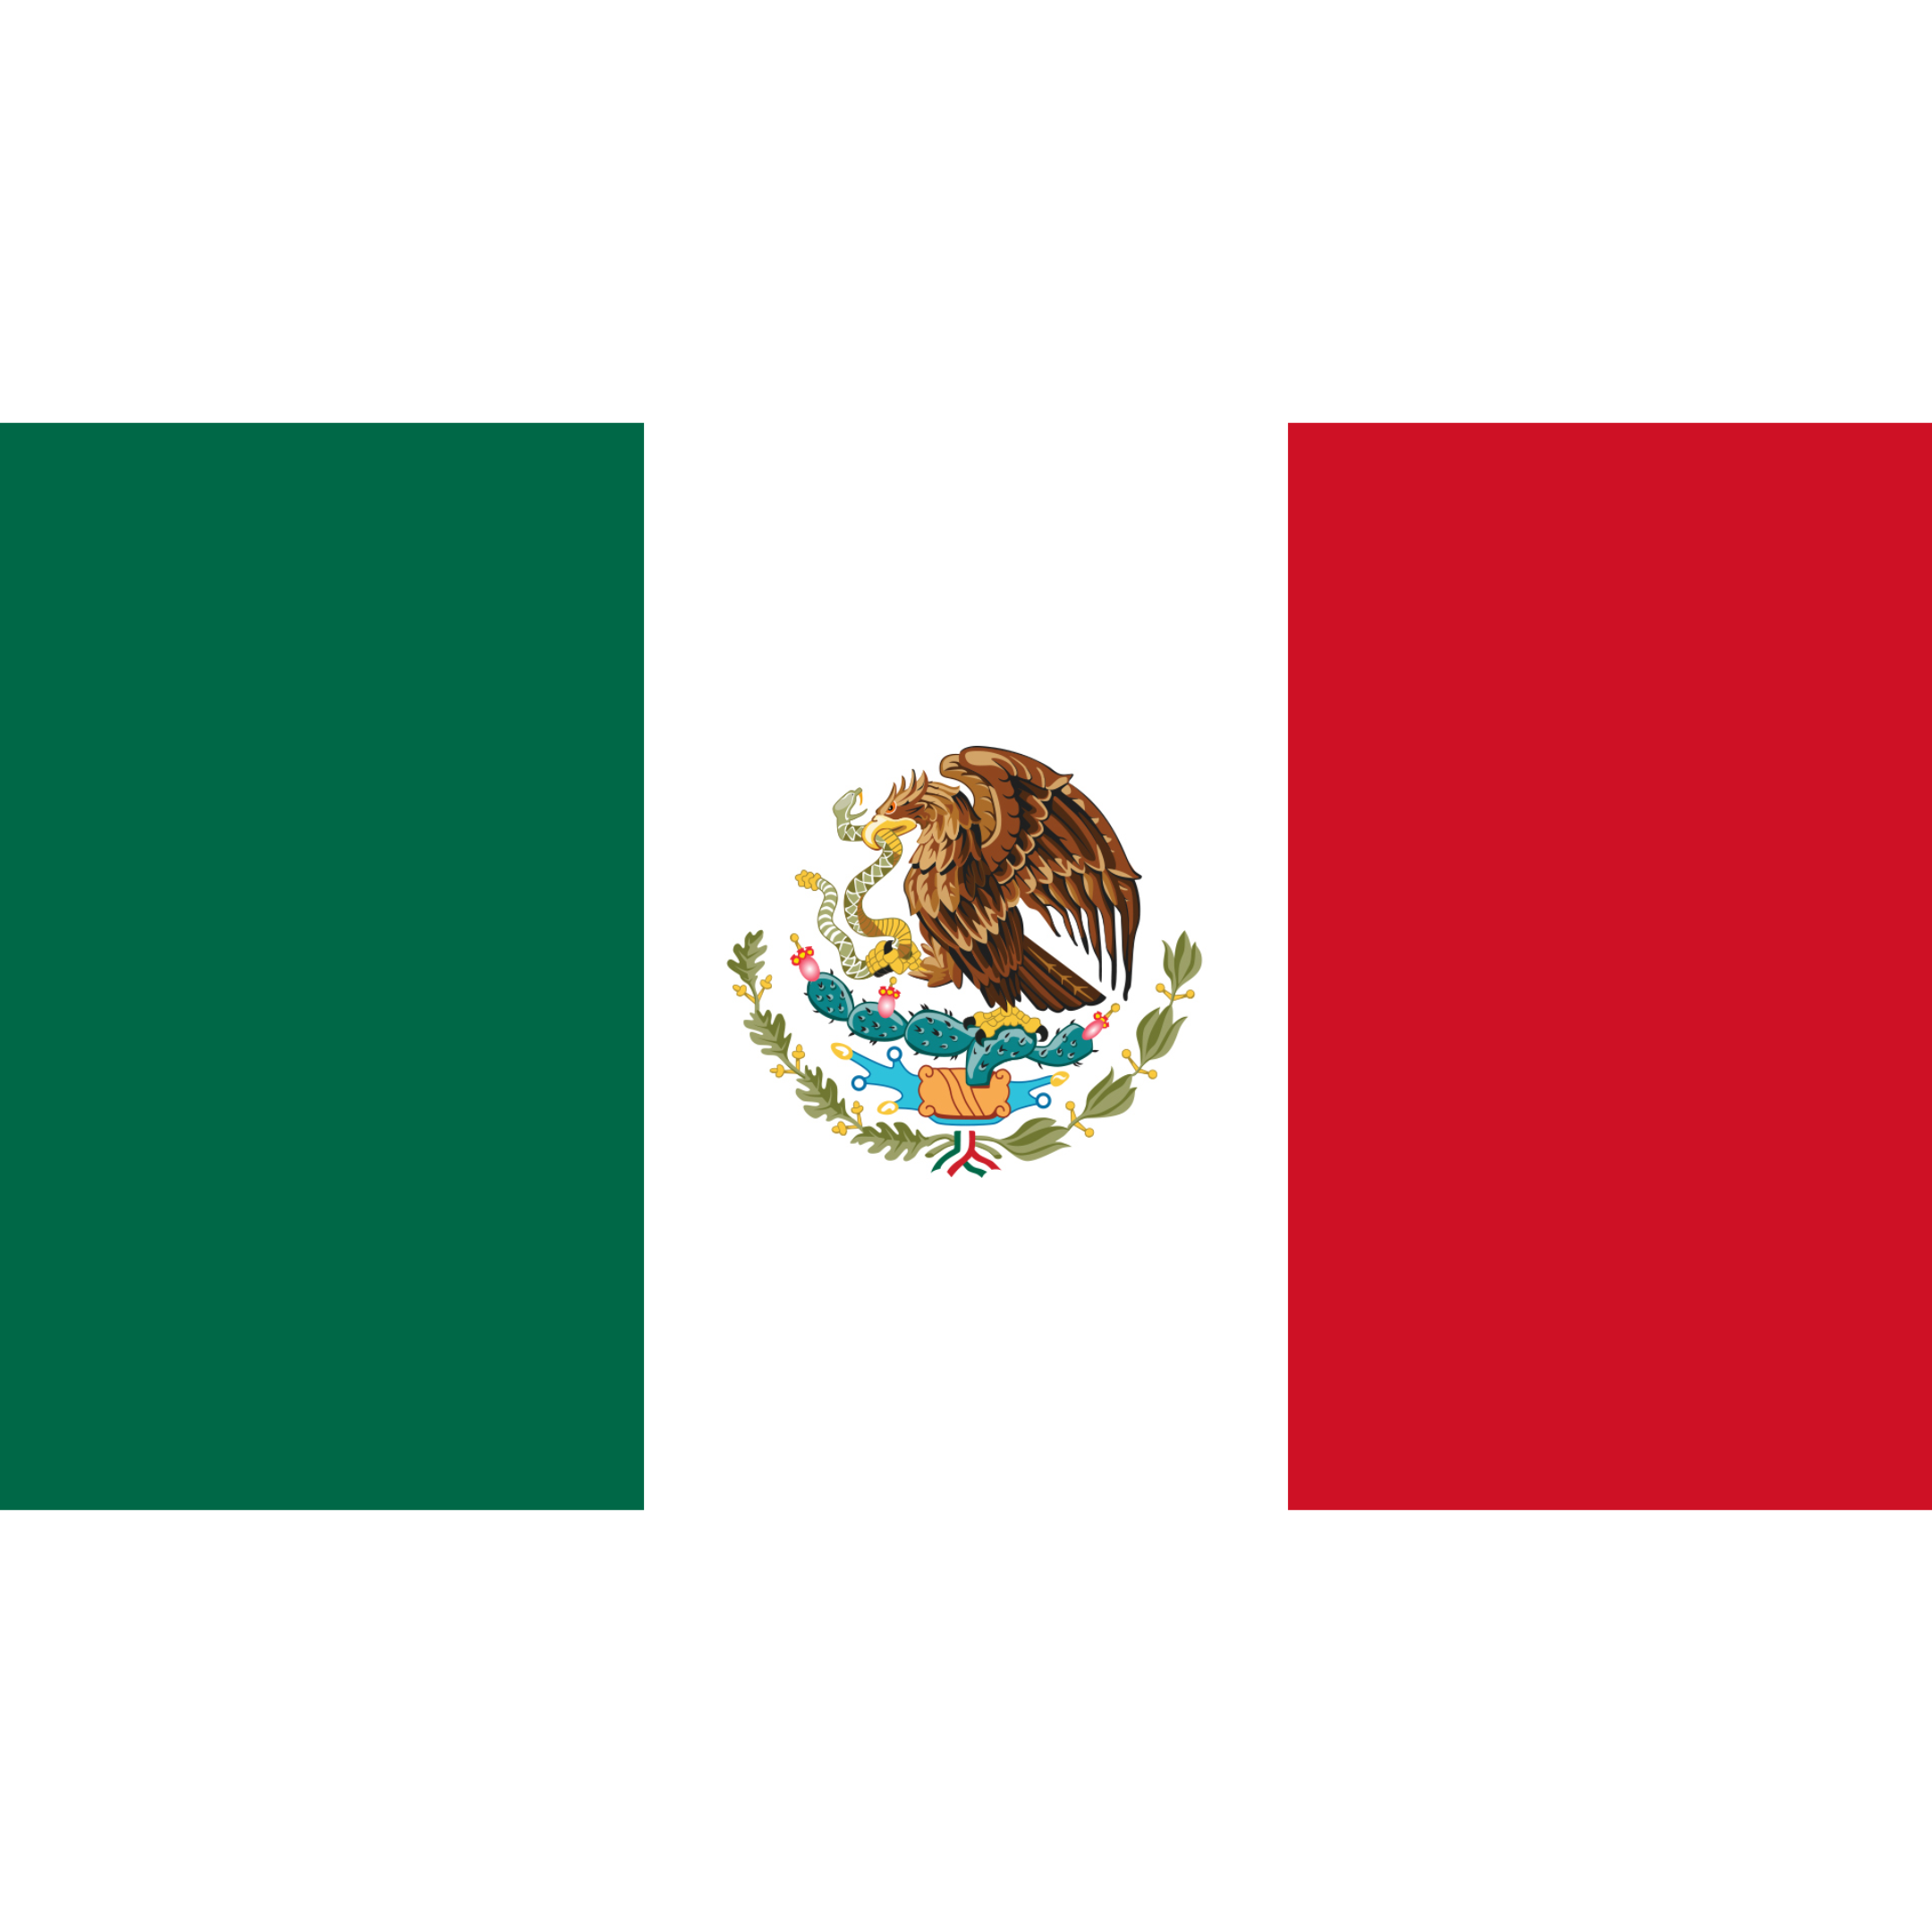 The flag of Mexico has 3 vertical green, white and red bands with Mexico's national coat of arms in the centre.